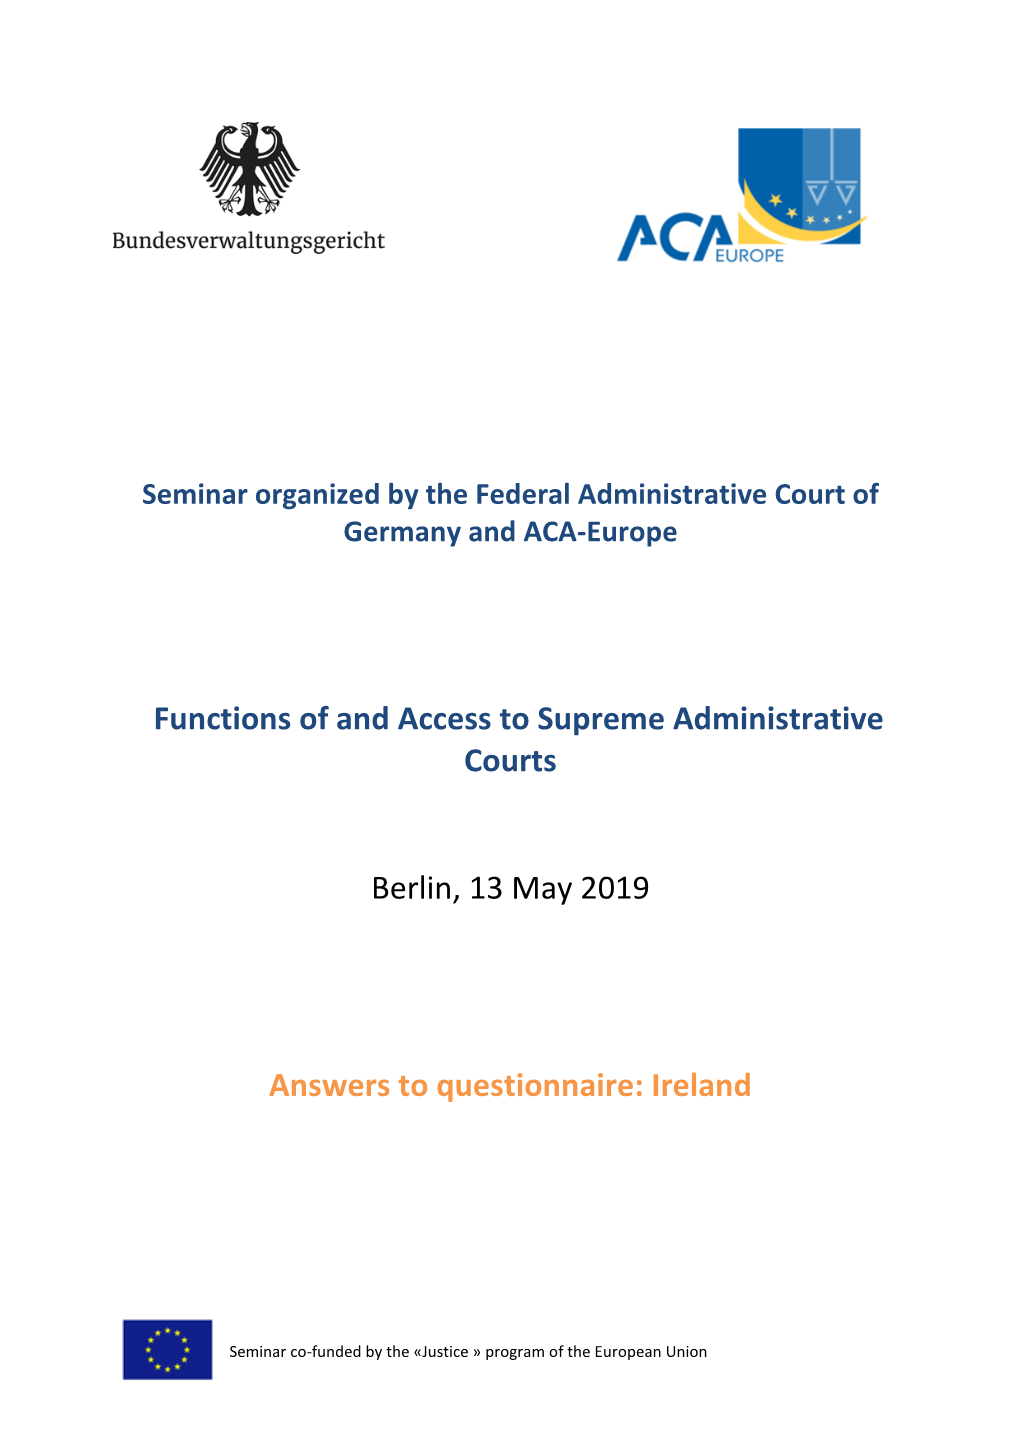 Functions of and Access to Supreme Administrative Courts